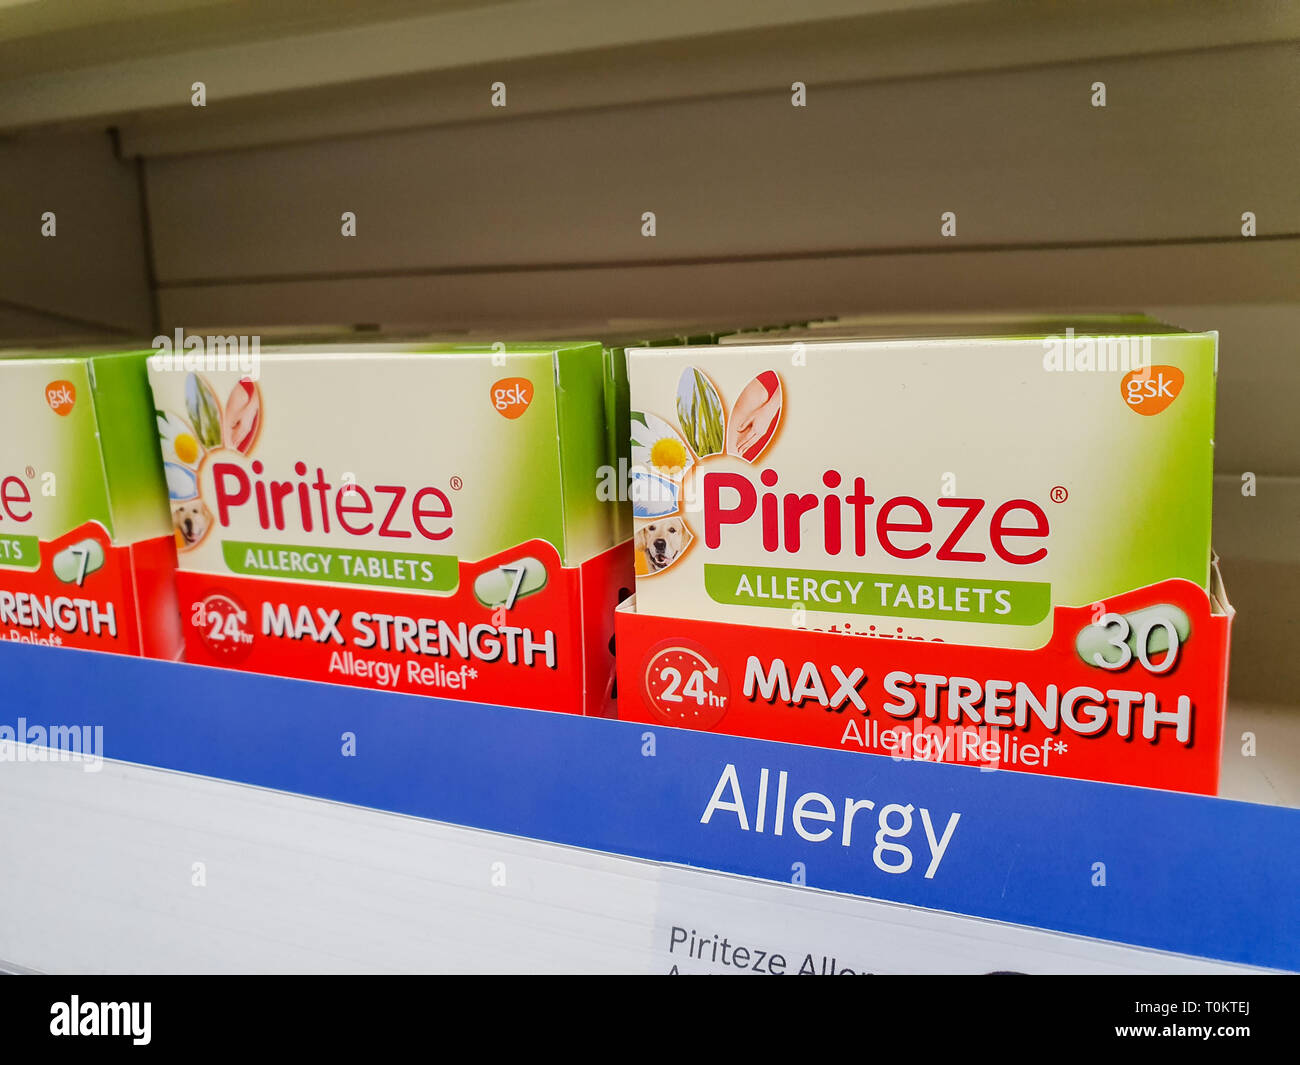 SHEFFIELD, UK - 20TH MARCH 2019: boxes of Piriteze allergy tablets for sale in a Tesco Stock Photo